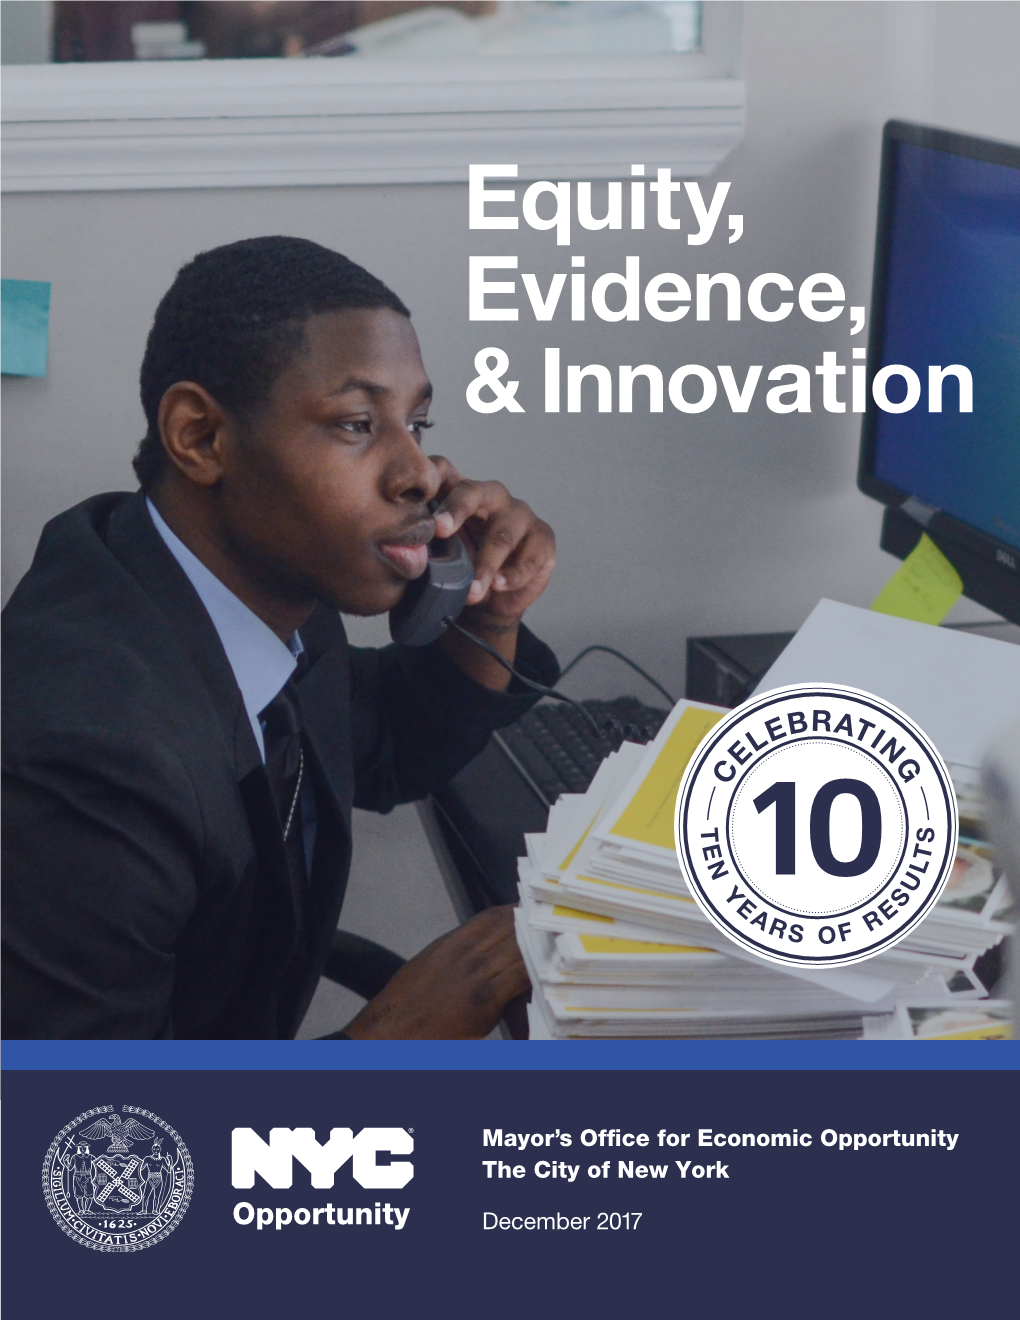 Equity, Evidence, & Innovation